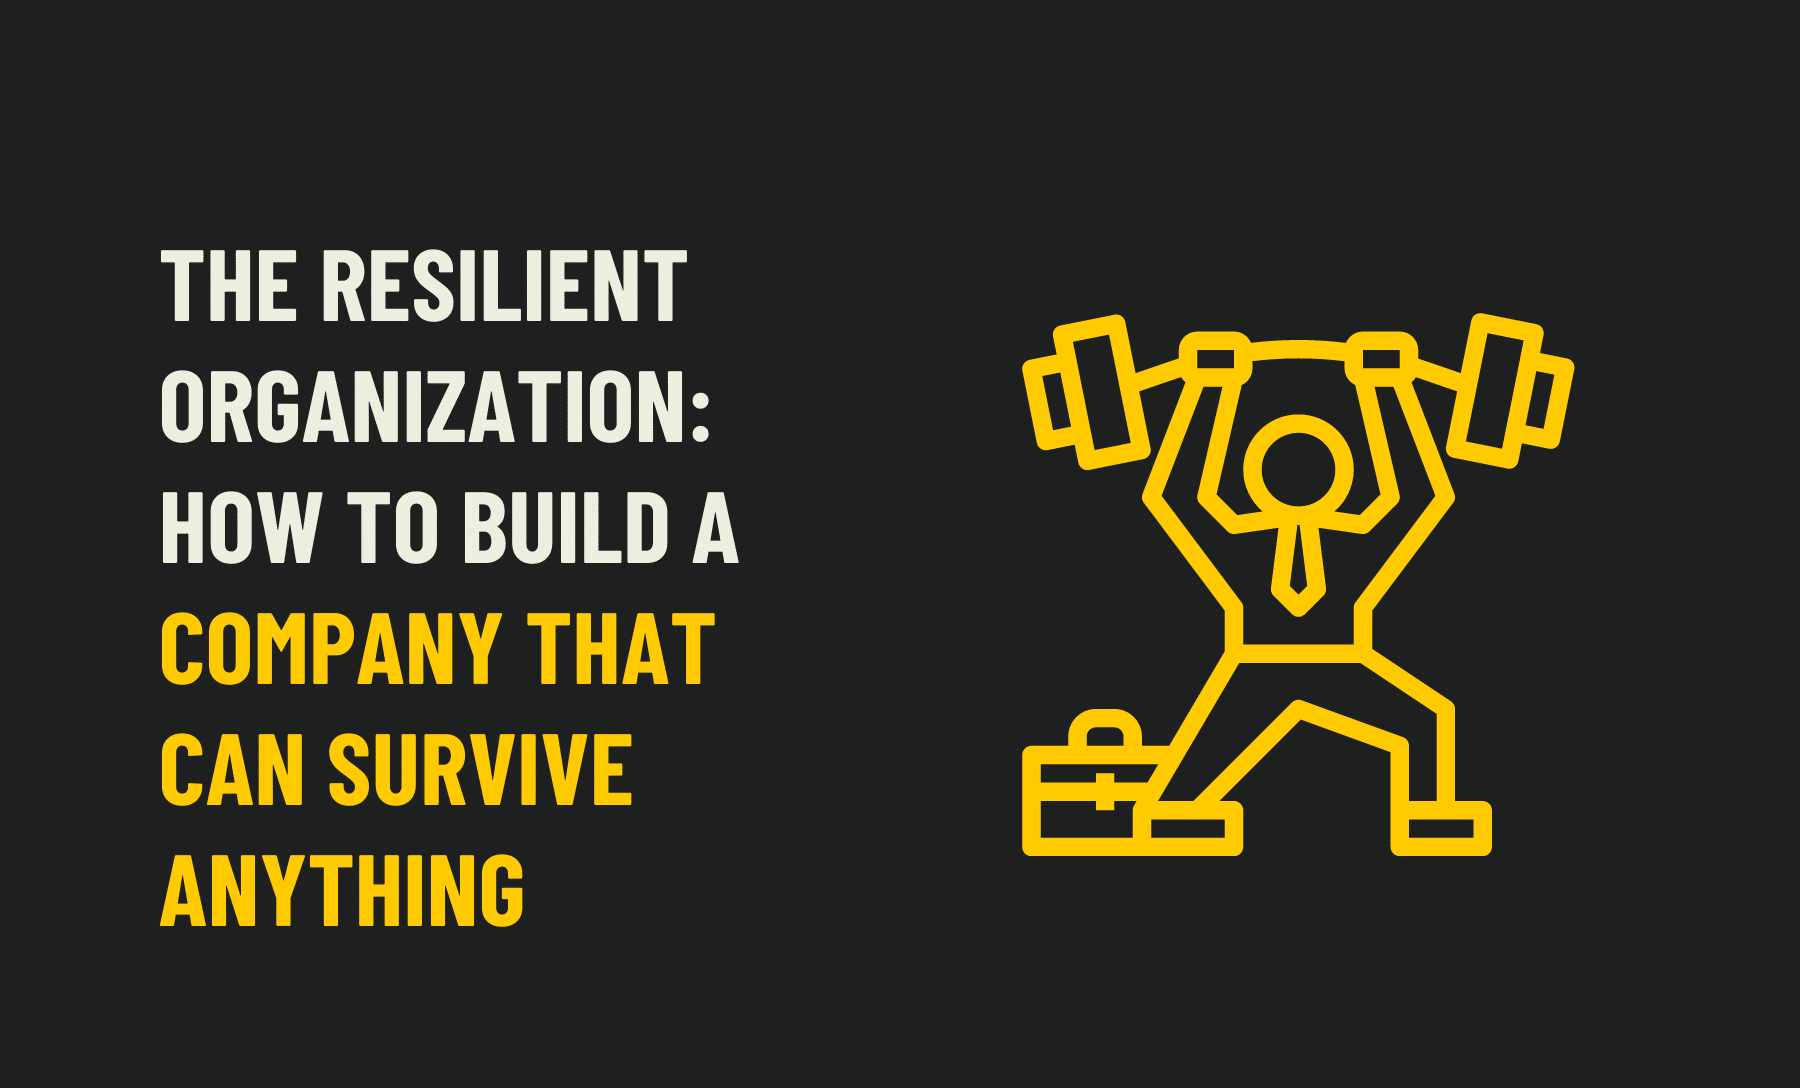 The Resilient Organization: How to Build a Company That Can Survive Anything